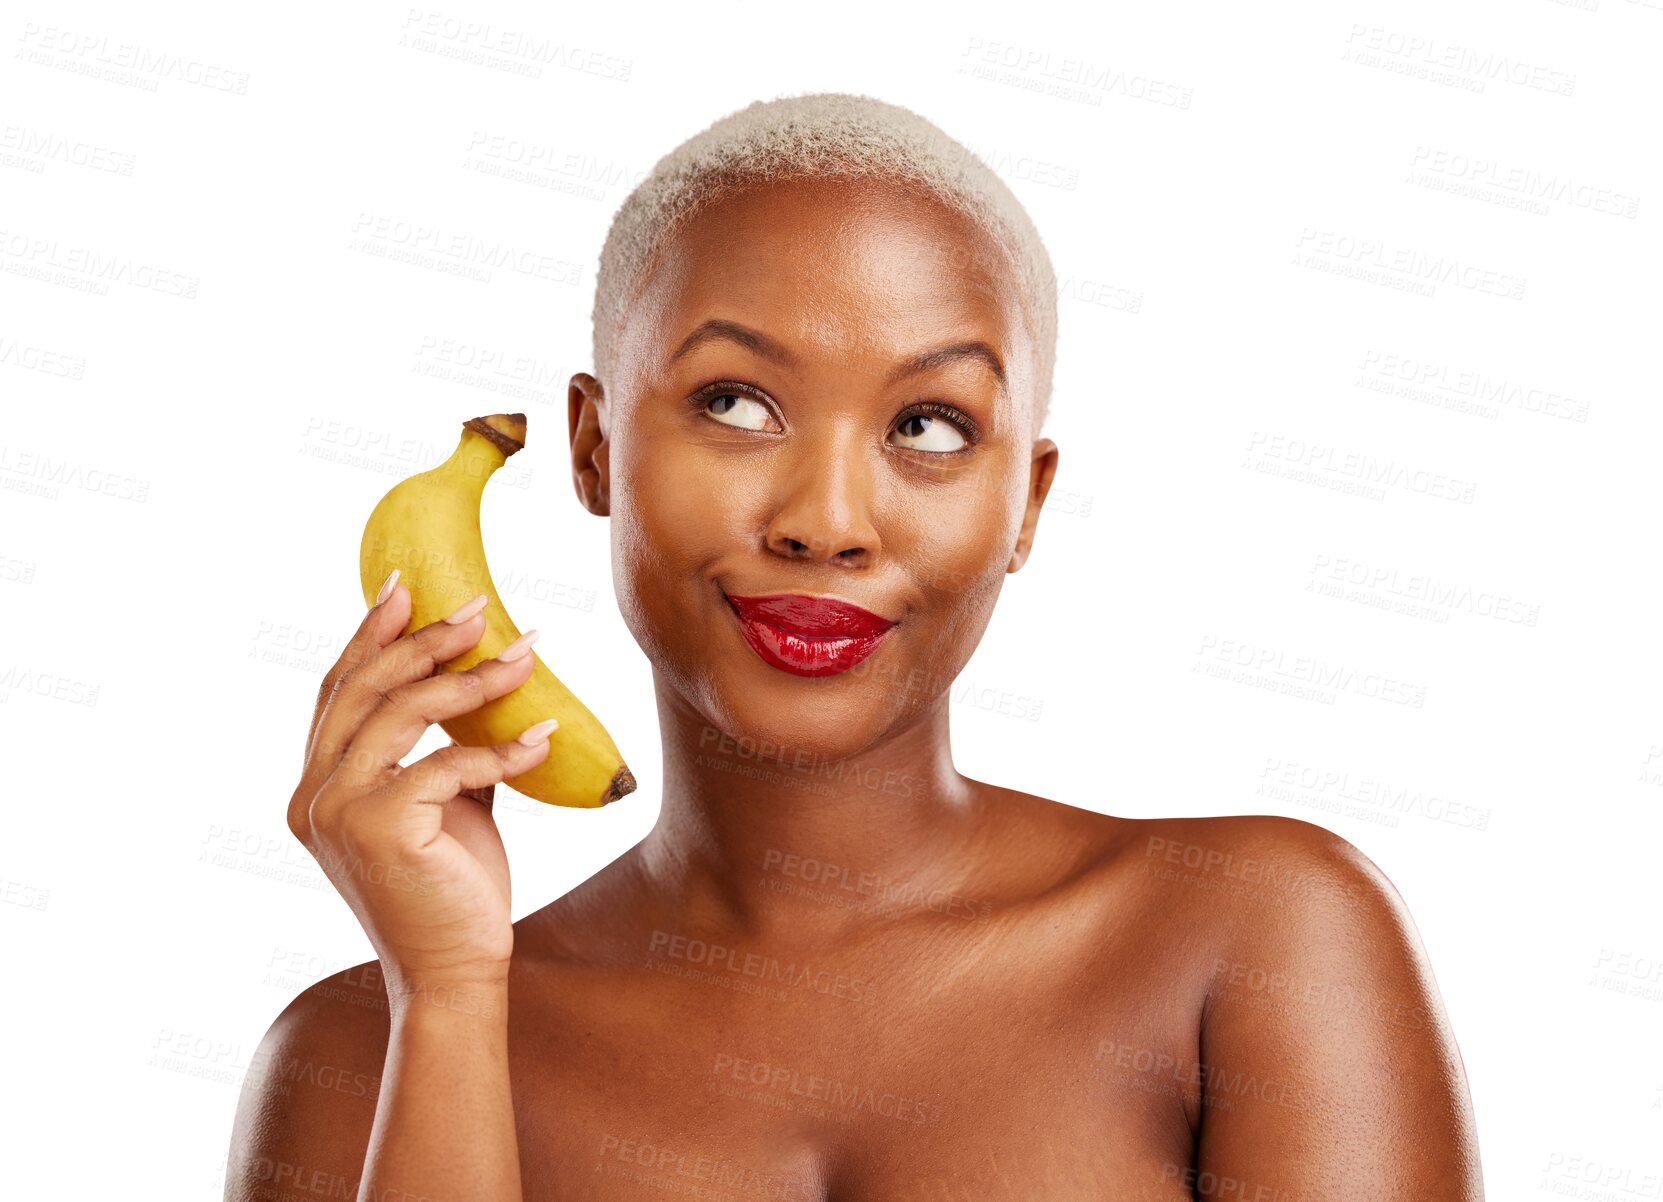 Buy stock photo Beauty, phone call and face of woman with banana and fake conversation isolated on png transparent background. Playful, black person and mobile communication, acting annoyed and funny chat with fruit